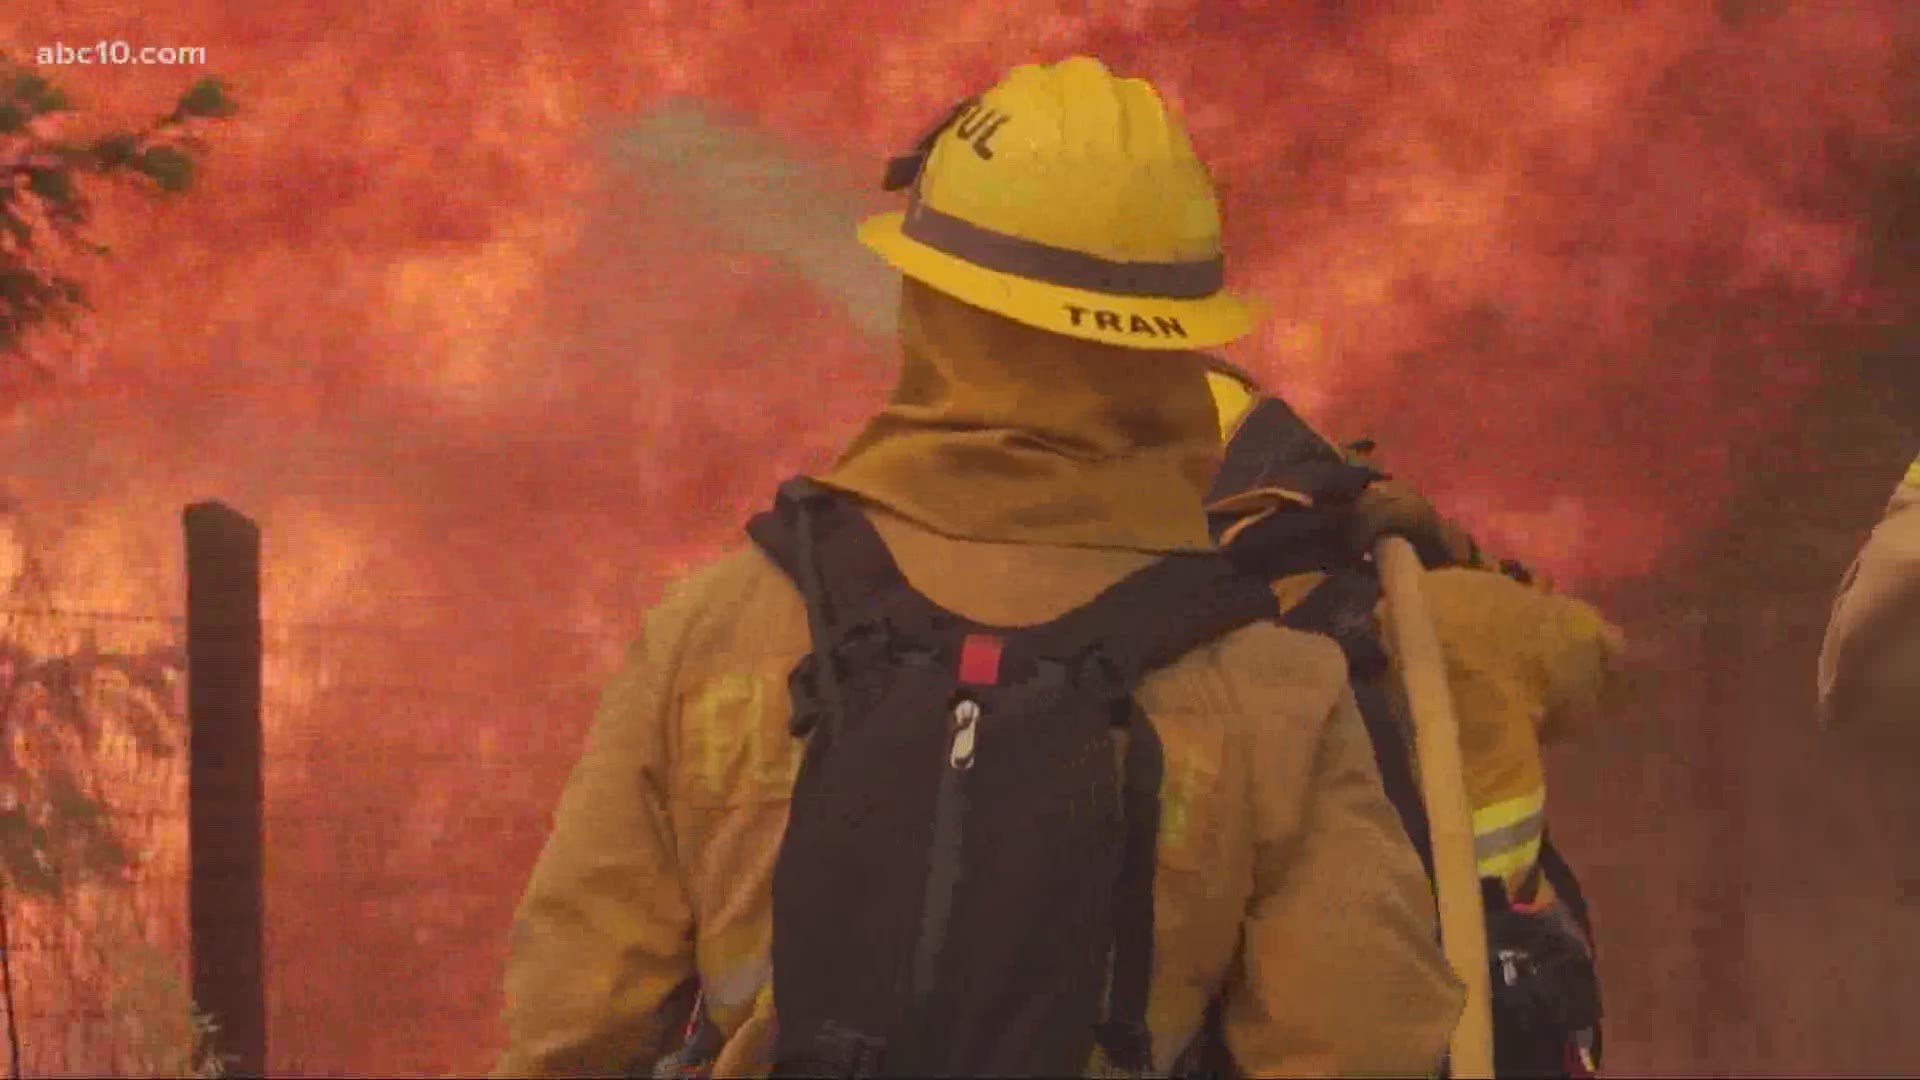 Cal Fire officials spoke to ABC10 how they are expecting to continue to combat wildfires despite running low on resources.